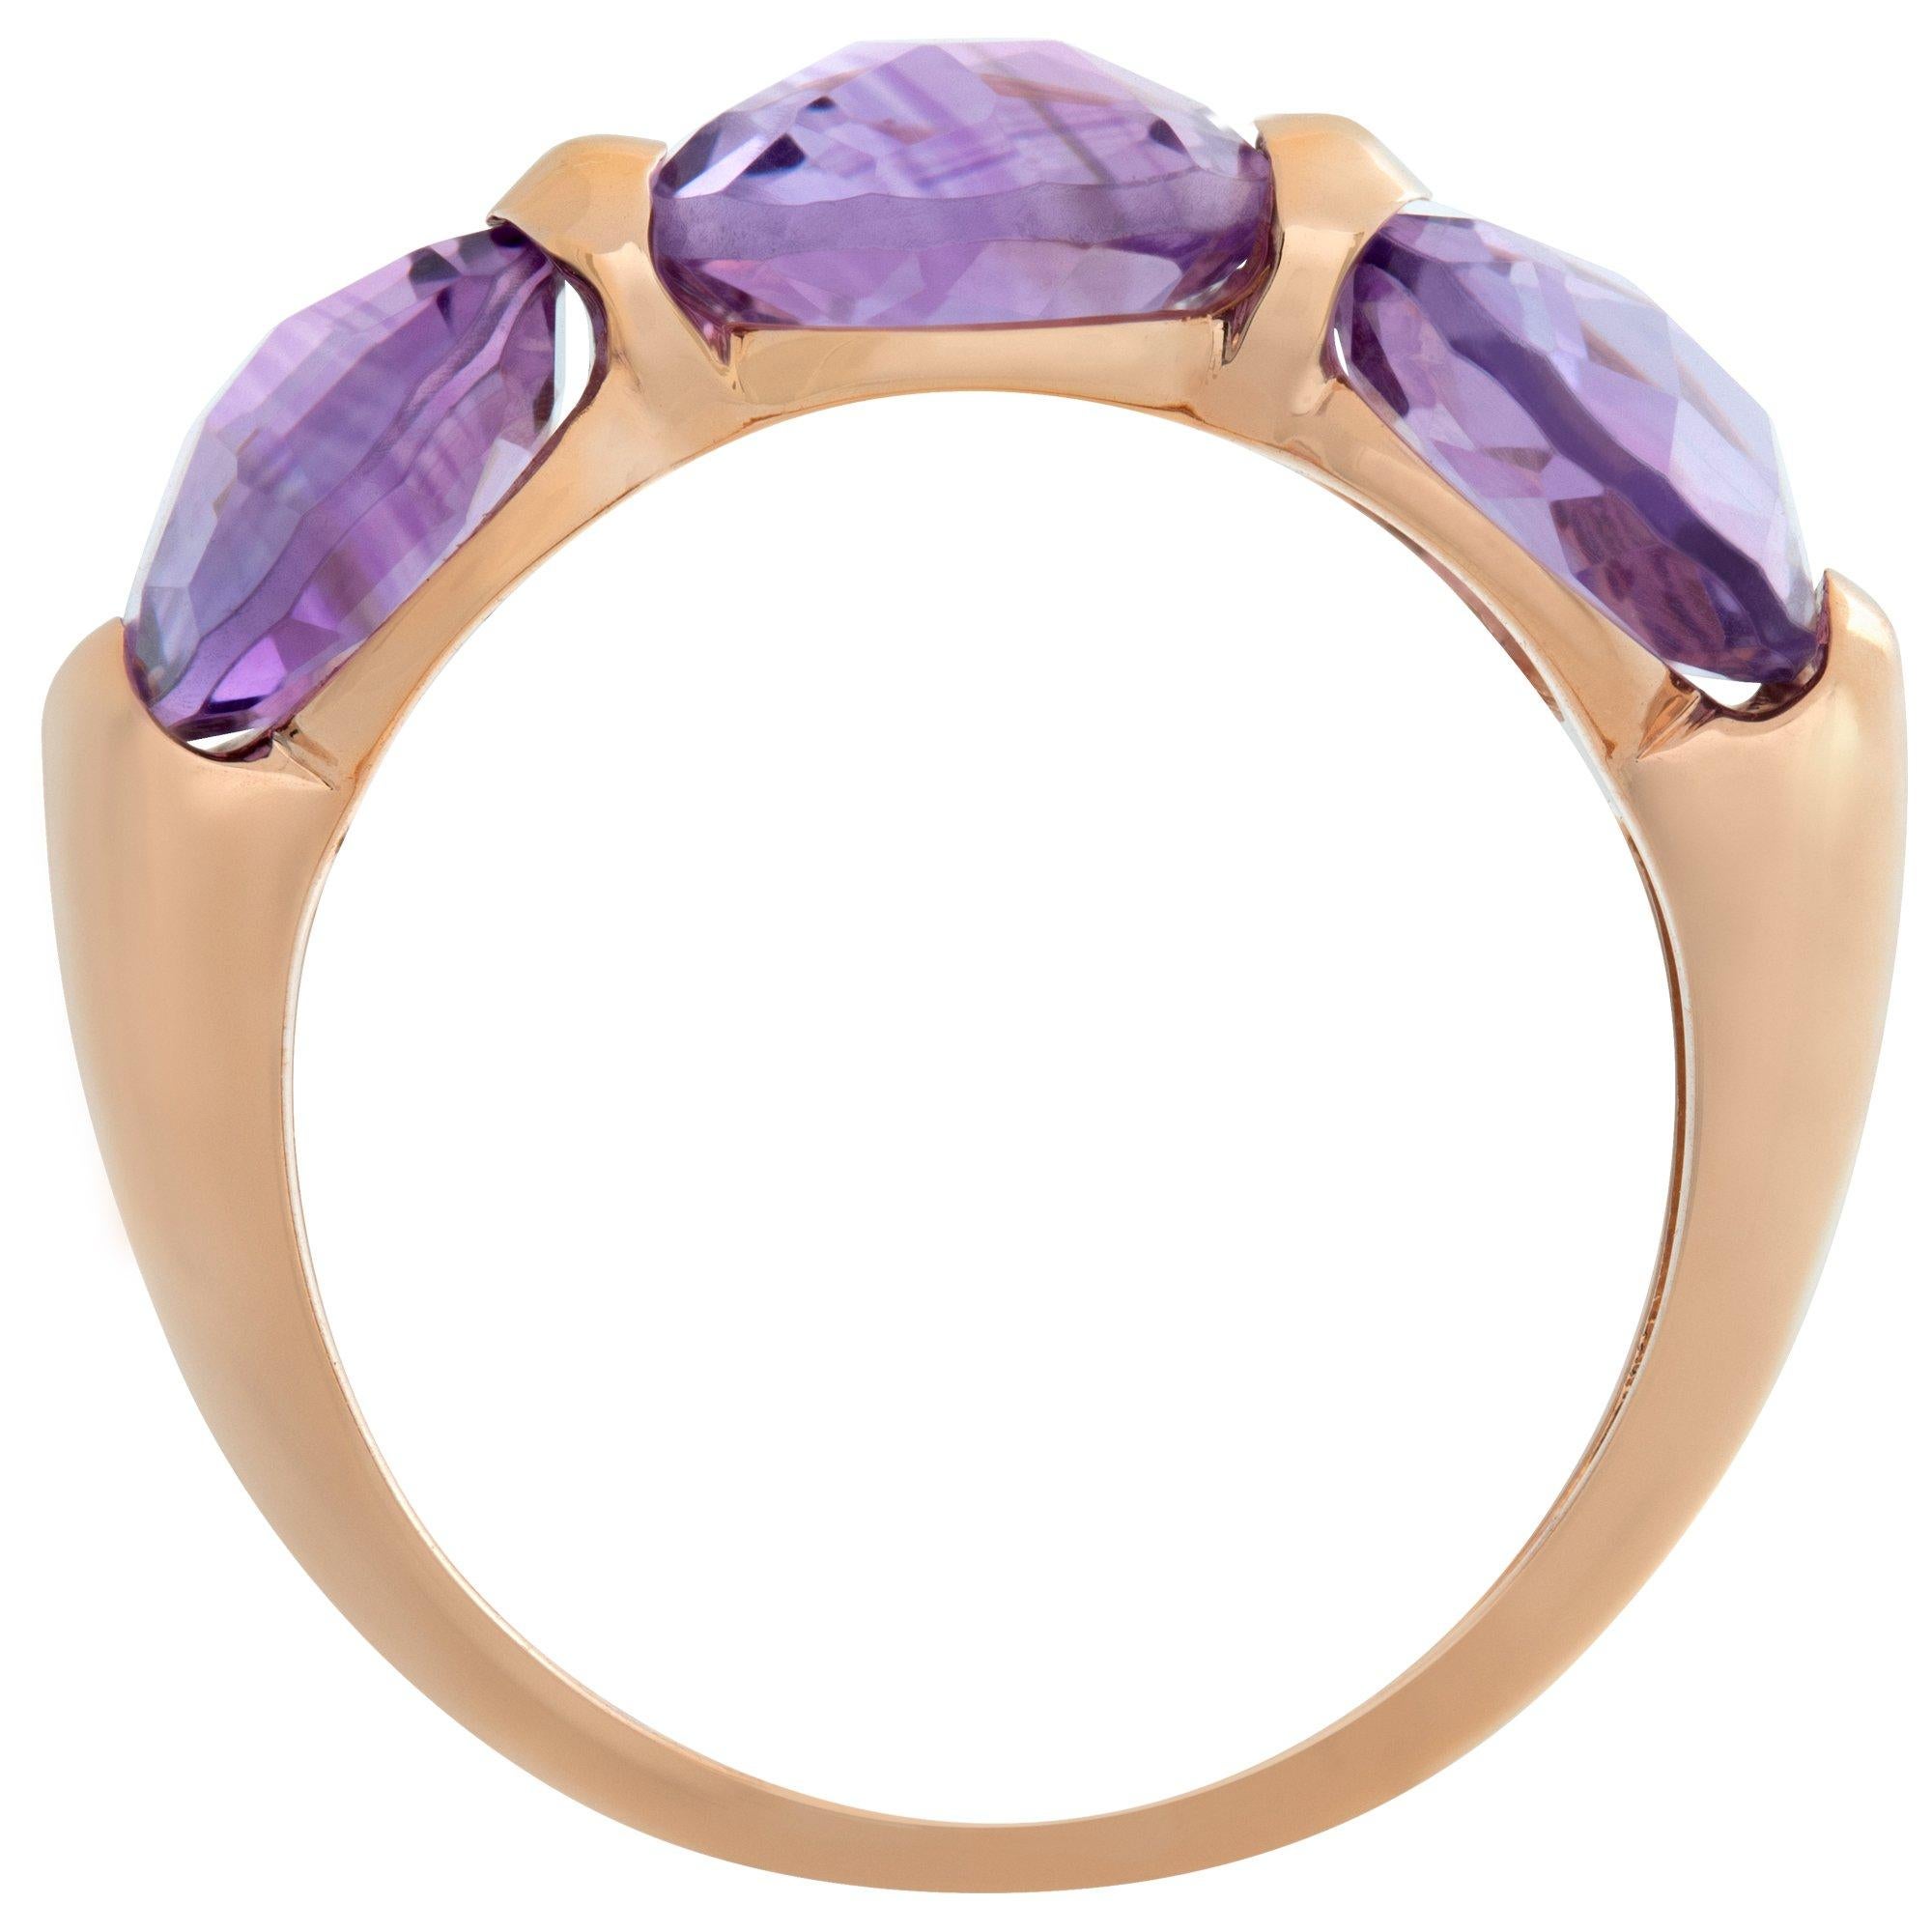 Women's Round brilliant cut Amethyst ring set in yellow gold. Size 7.